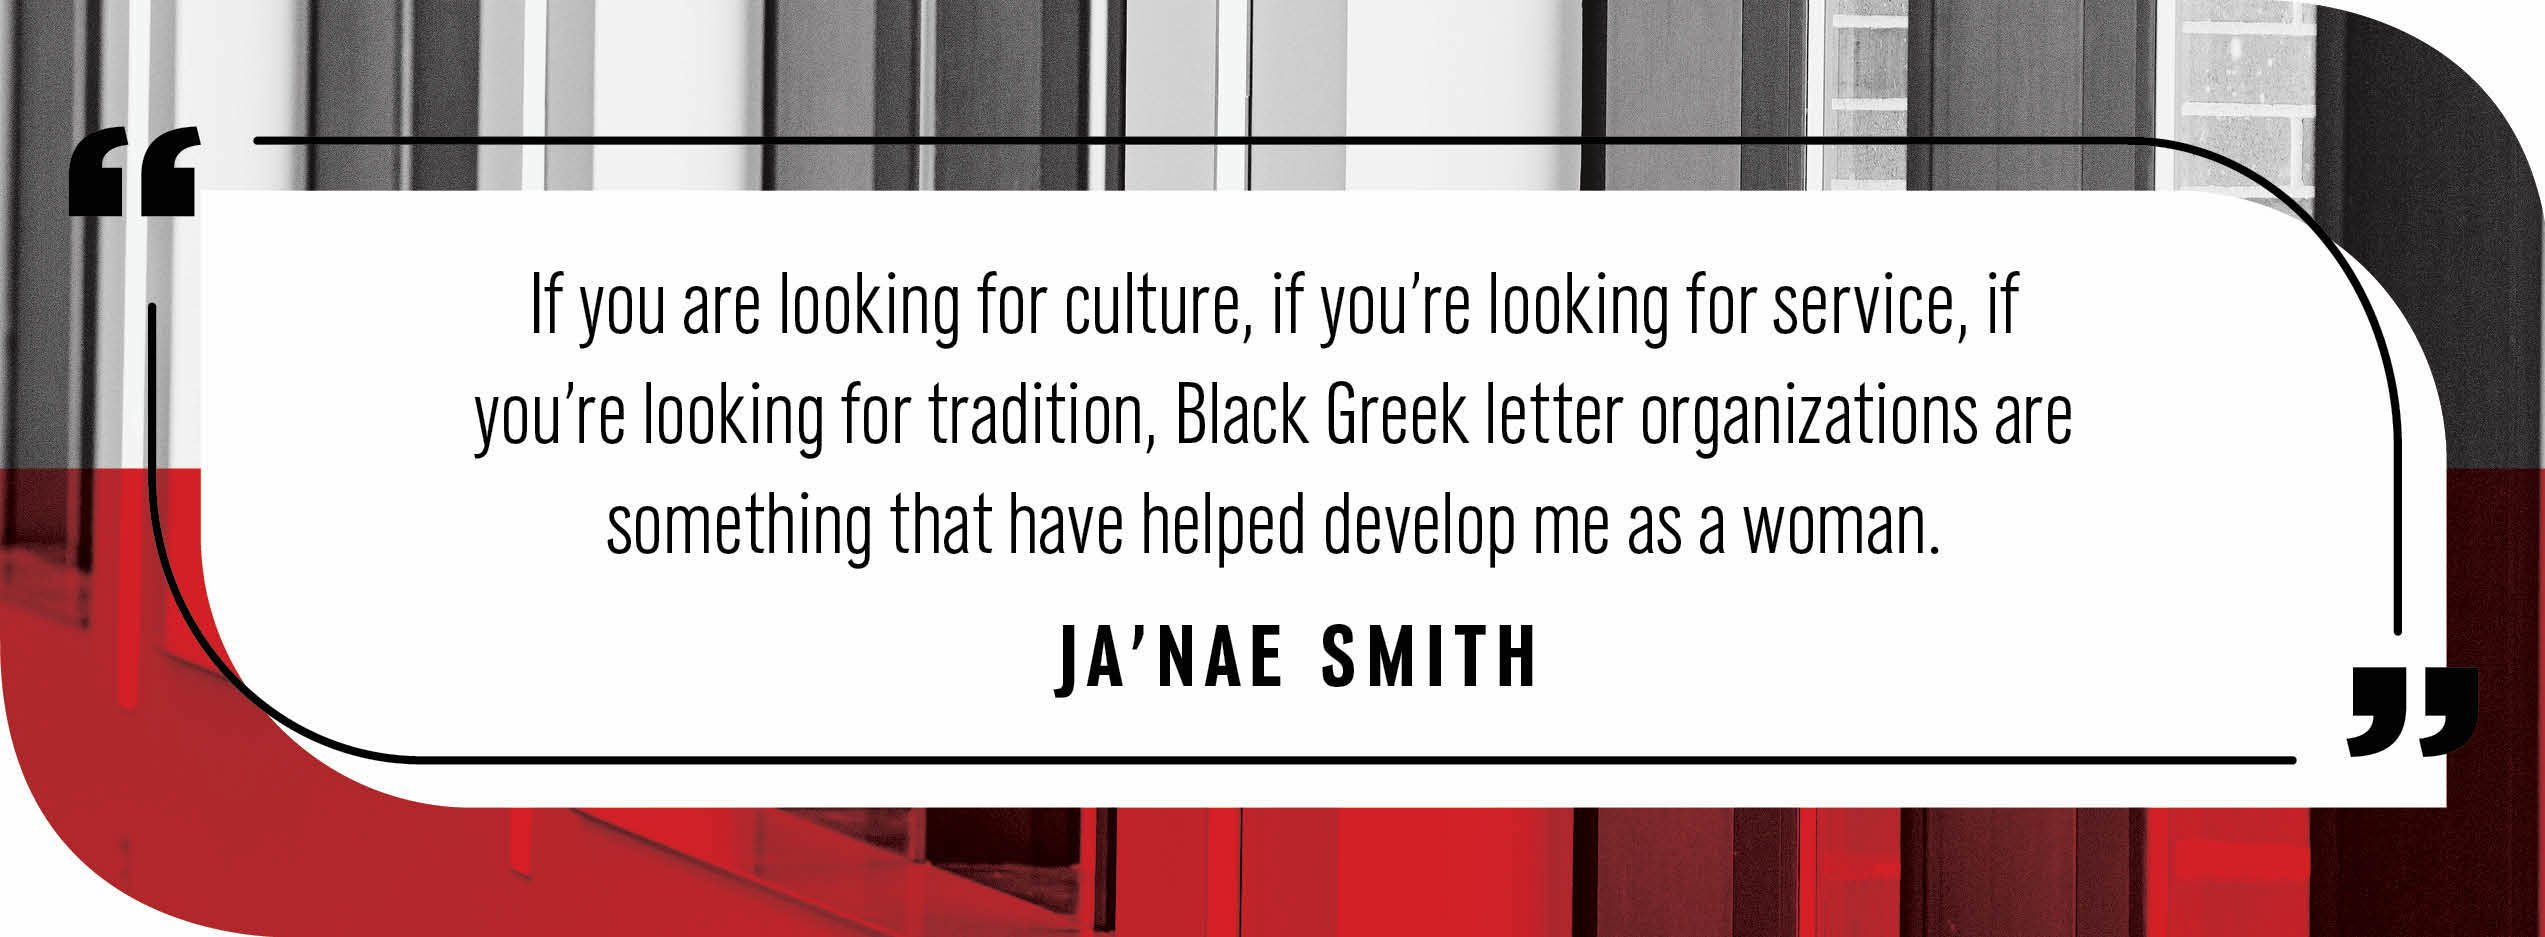 Quote by Ja'Nae Smith: "If you are looking for culture, if you’re looking for service, if you’re looking for tradition, Black Greek letter organizations are something that have helped develop me as a woman."